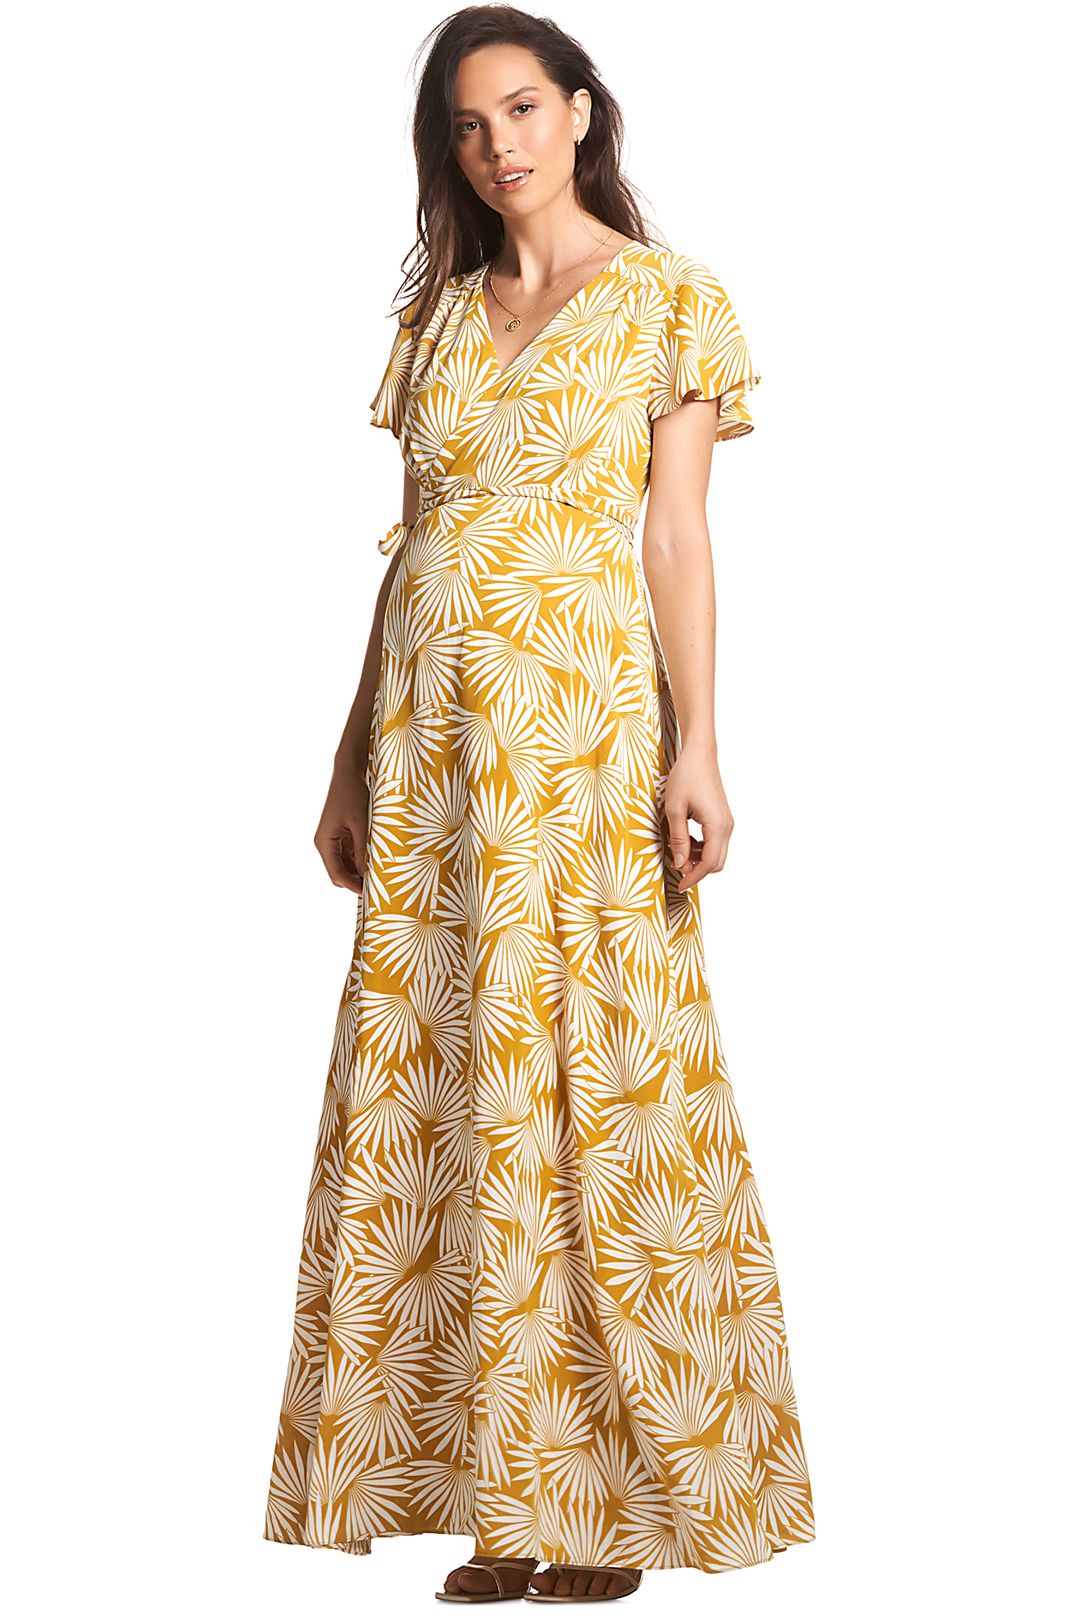 Elizabeth Maxi Dress in Yellow Sun Print by Soon Maternity for Hire